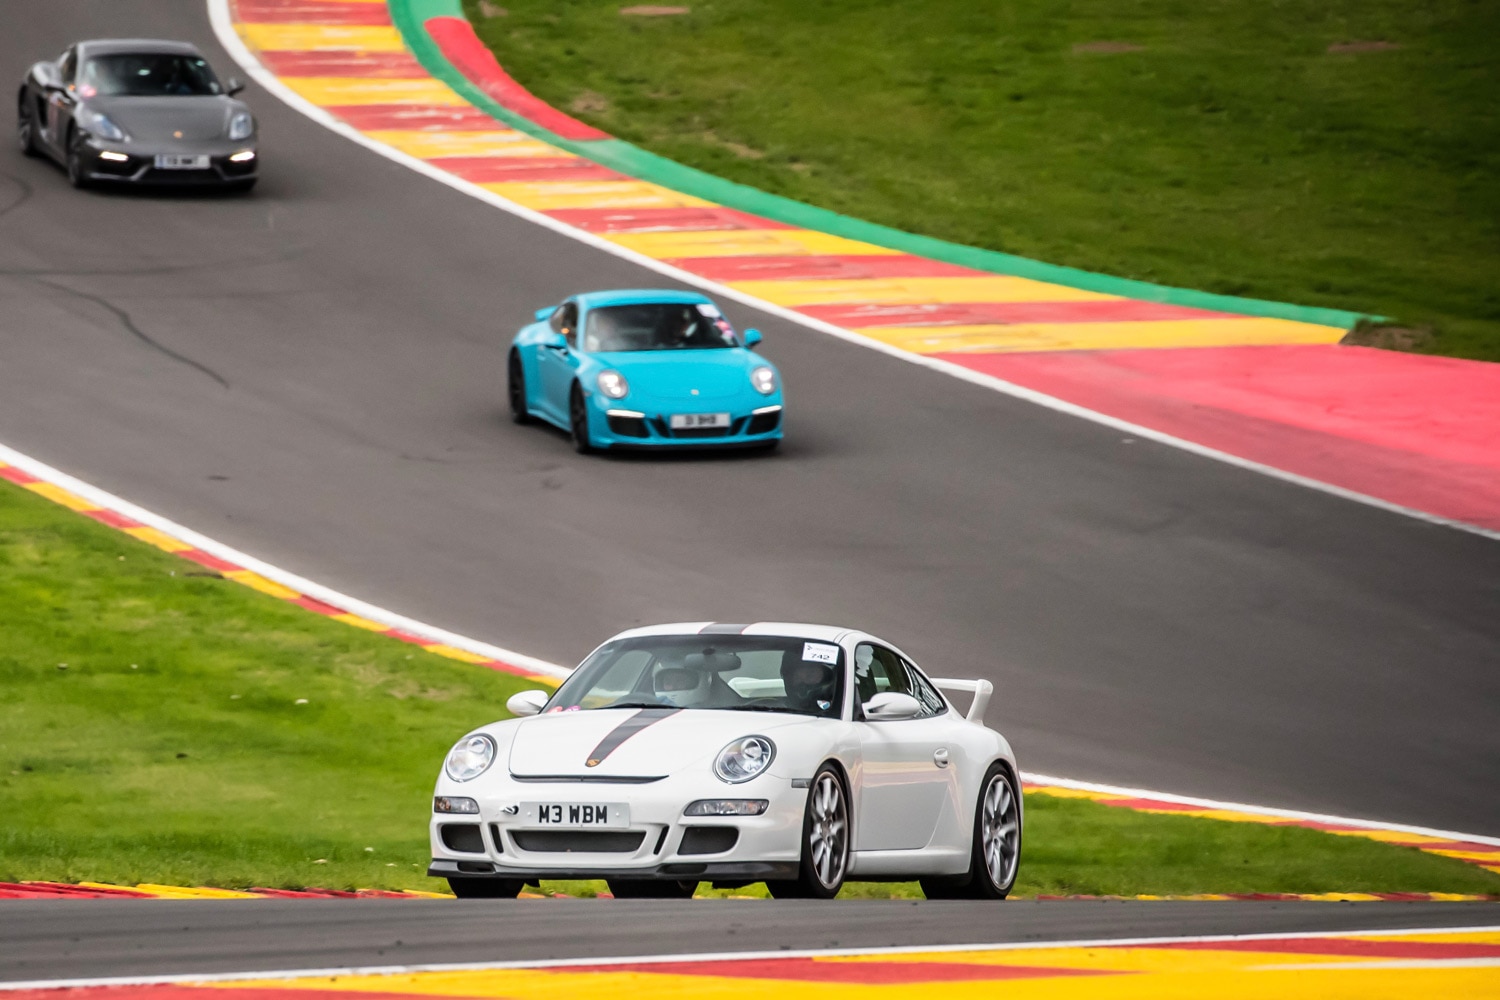 White, blue, and black Porsche navigating the turns at a racetrack.